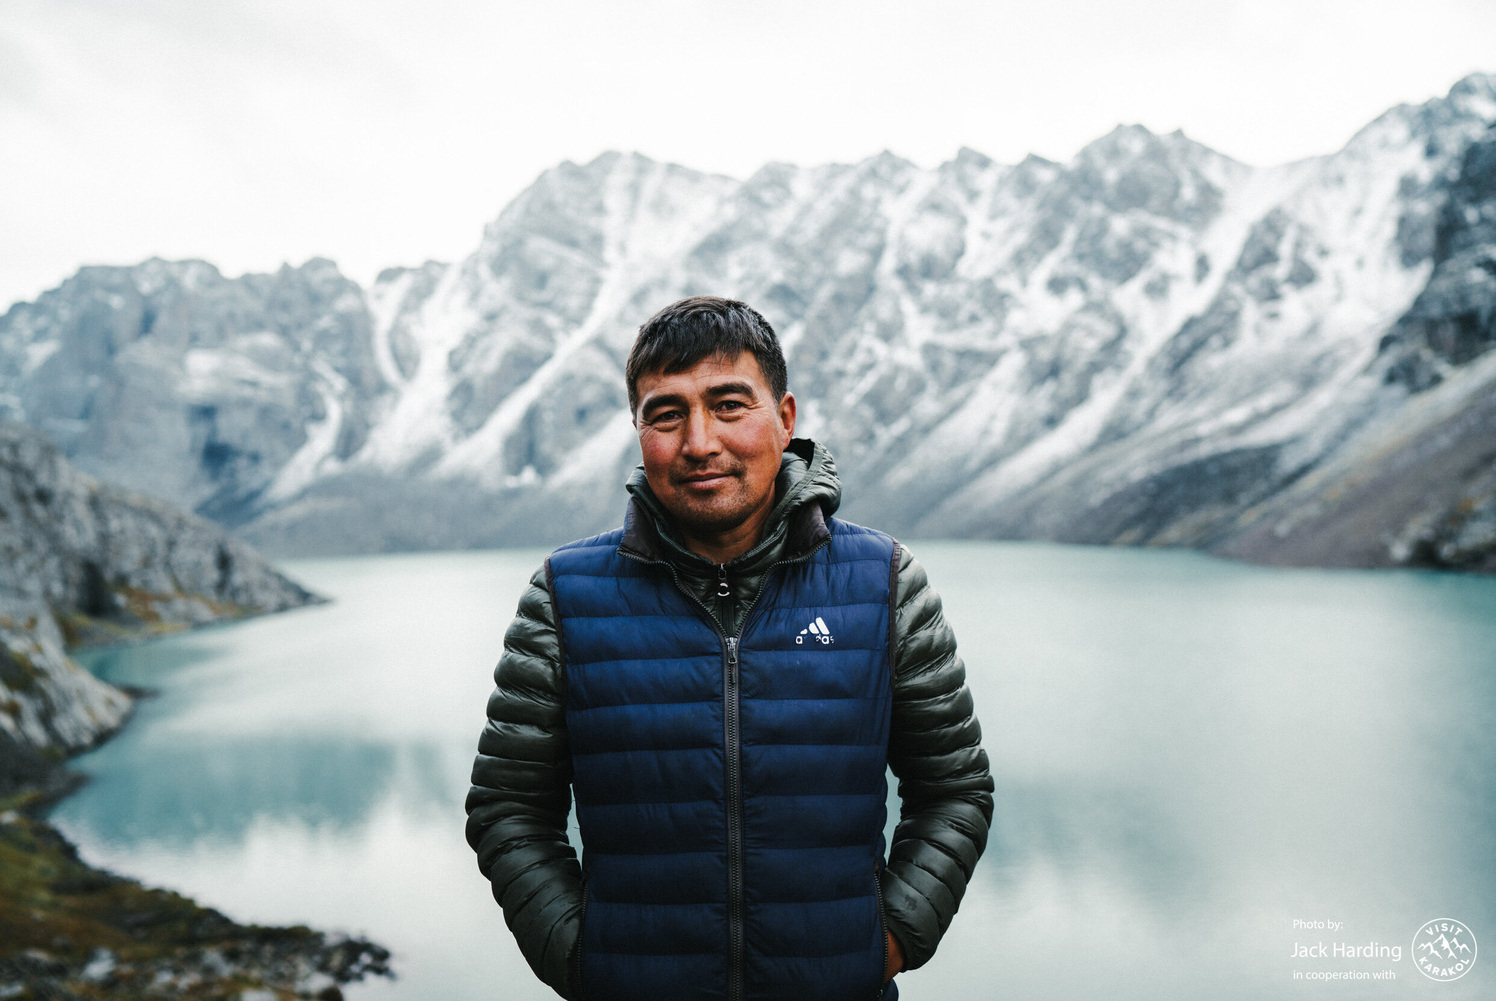 Nurlan, one of our guides from the last few years! Location Ala-Kul, Karakol. Photo by Jack Harding